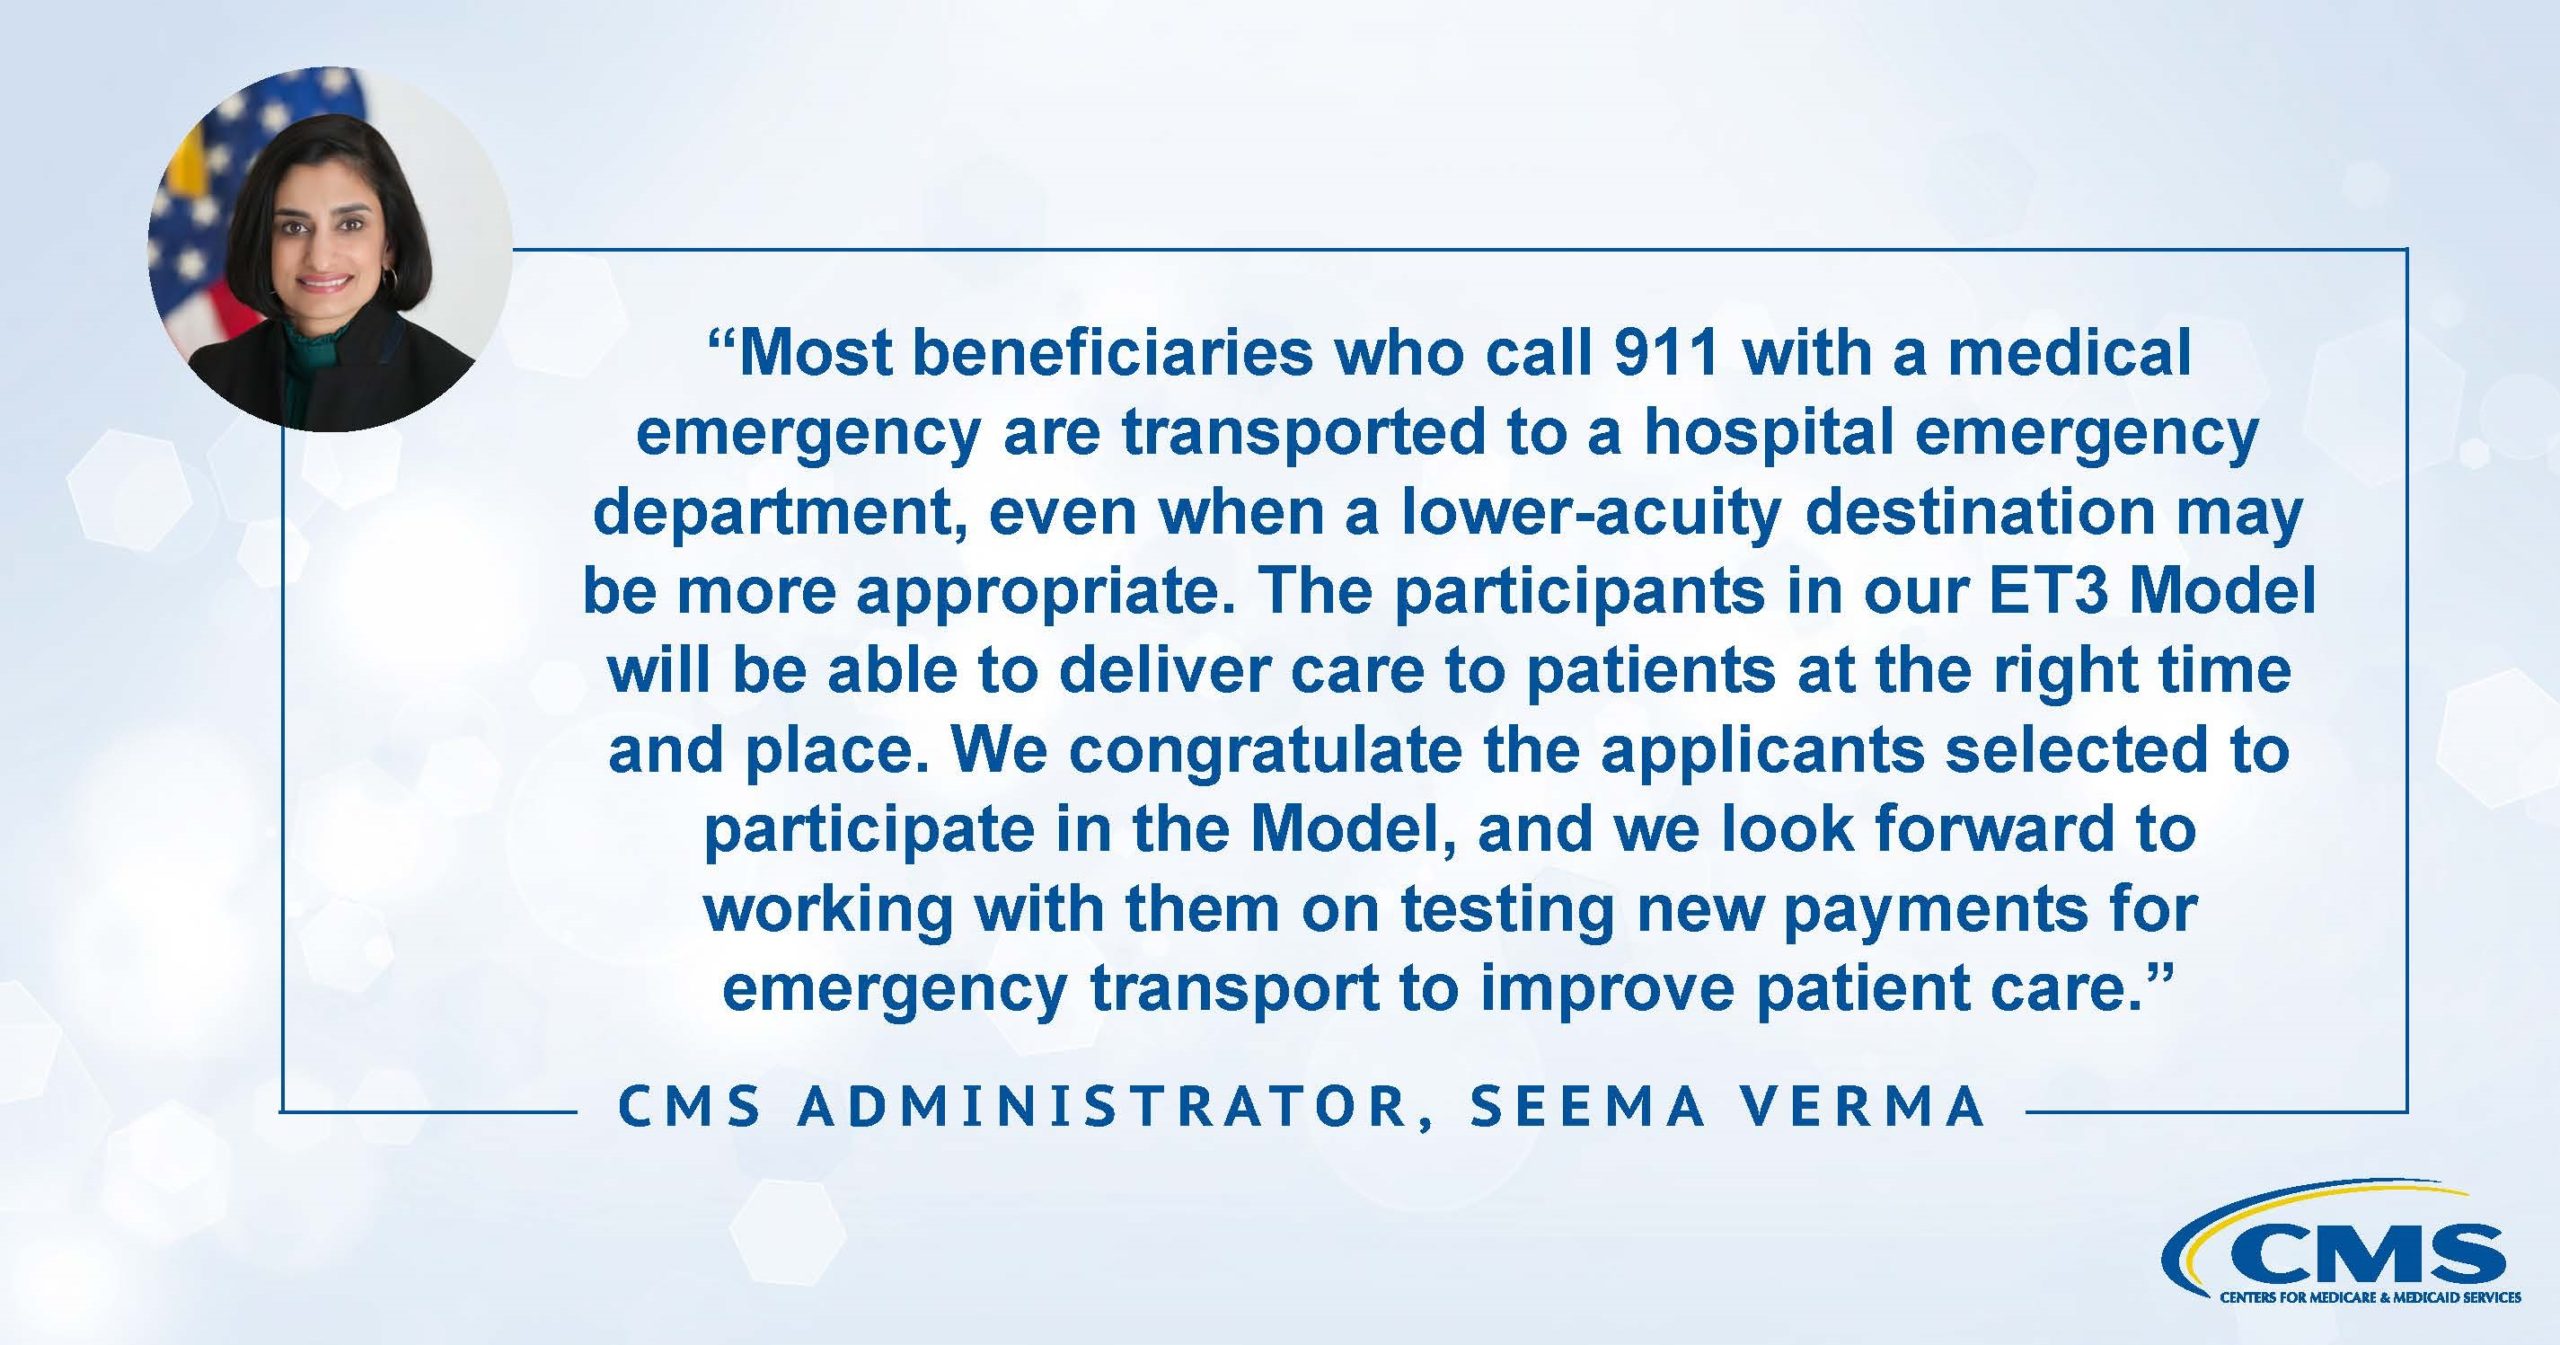 Most beneficiaries who call 911 with a medical emergency are therefore transported to one of these facilities, and most often to a hospital emergency department, even when a lower-acuity destination may more appropriately meet an individual’s needs. The participants in our ET3 Model will be able to deliver care to patients at the right time and place. We congratulate the applicants selected to participate in the Model, and we look forward to working with them on testing new payments for emergency transport to improve patient care. CMS Administrator, Seema Verma